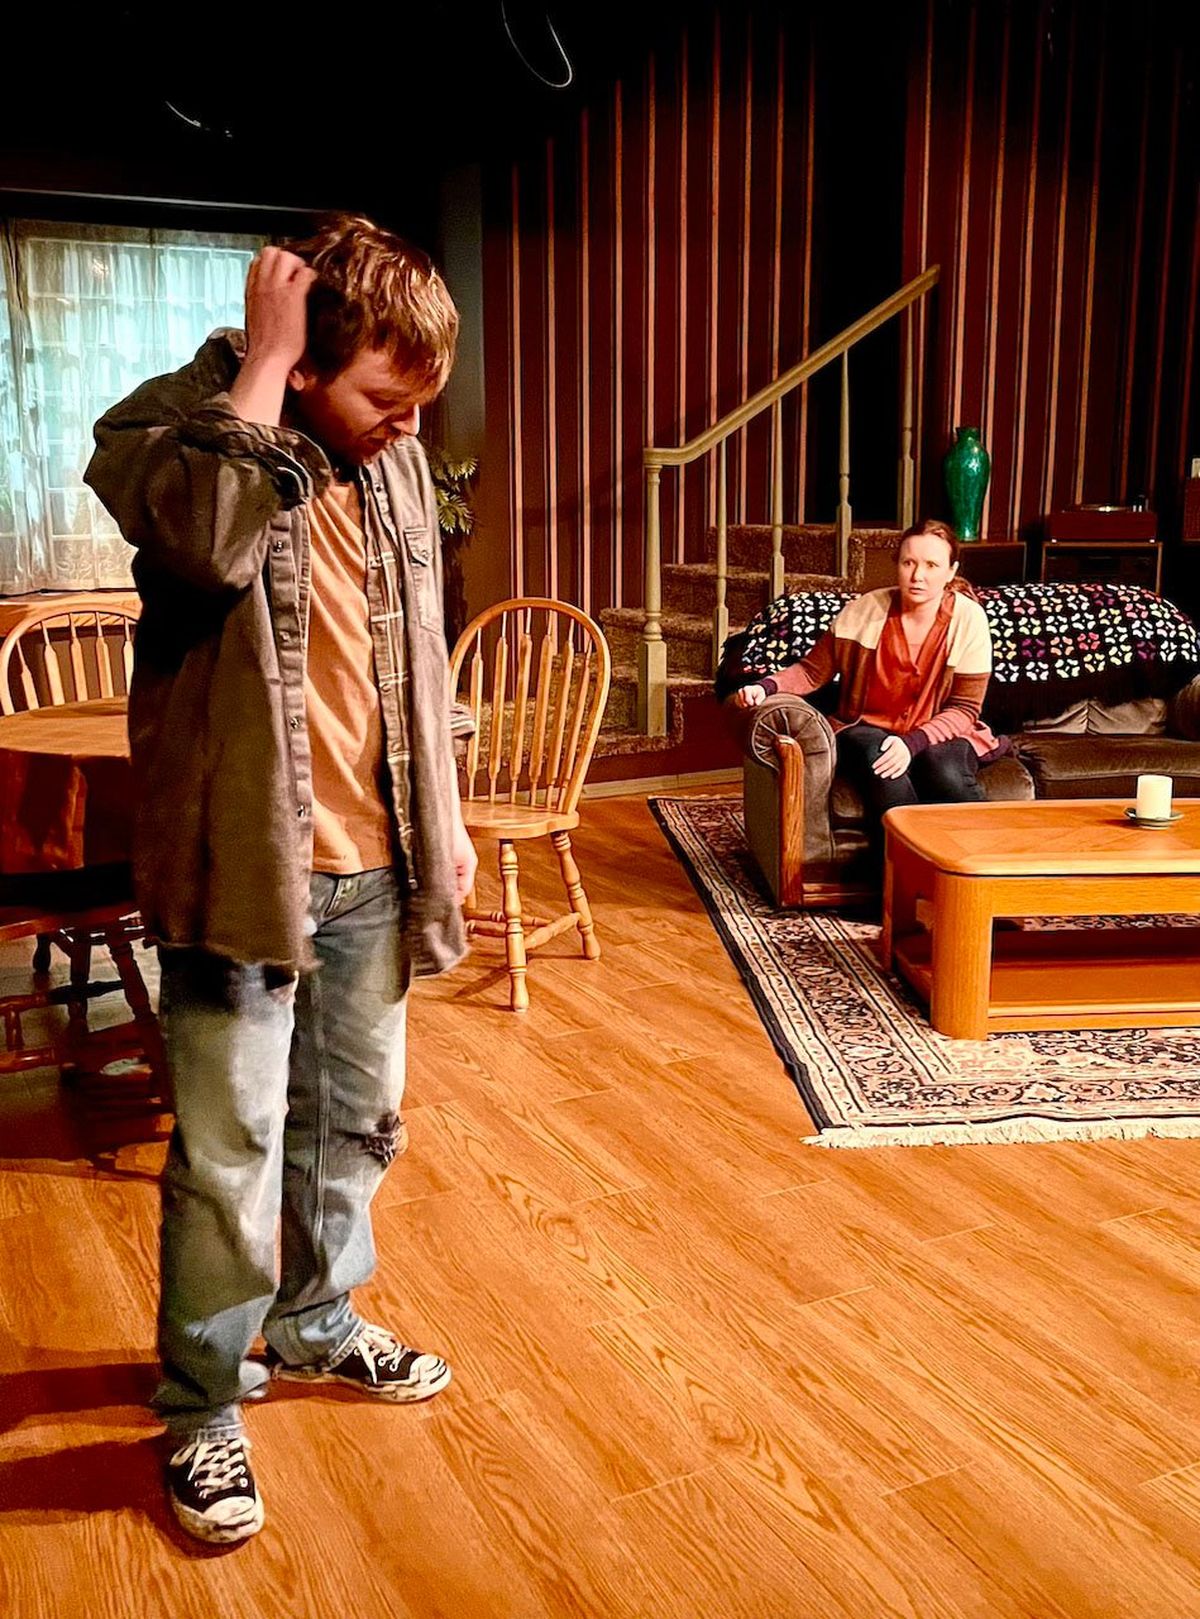 Barin Saxton as Cody, left, and Abby Burlingame as Jen in “I Thought I Knew You,” playing at Stage Left Theater.  (Courtesy of Jeremy Whittington)